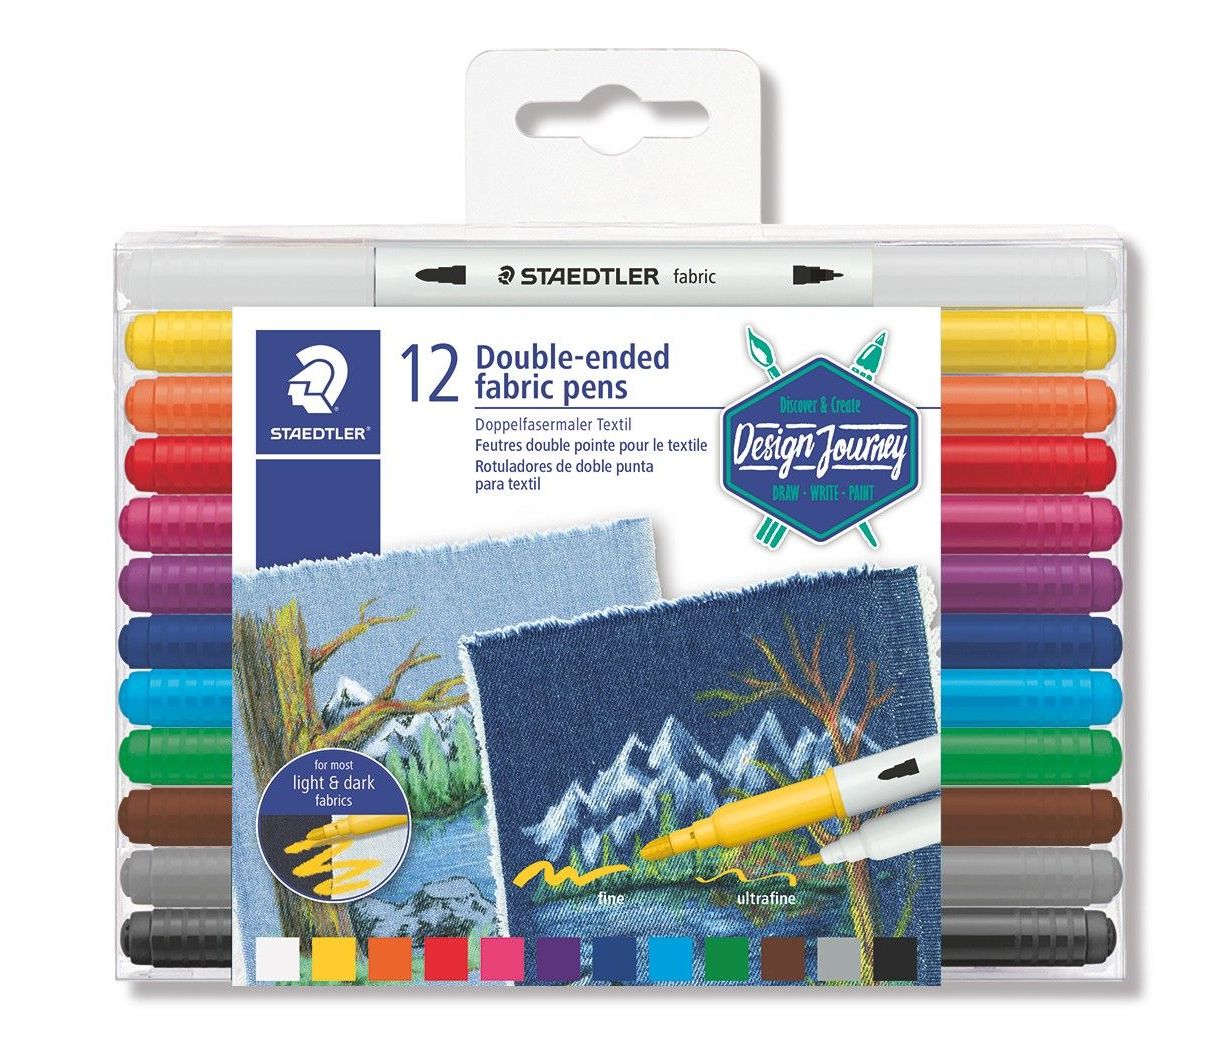 All about Watercolor Markers - FLAX art & design